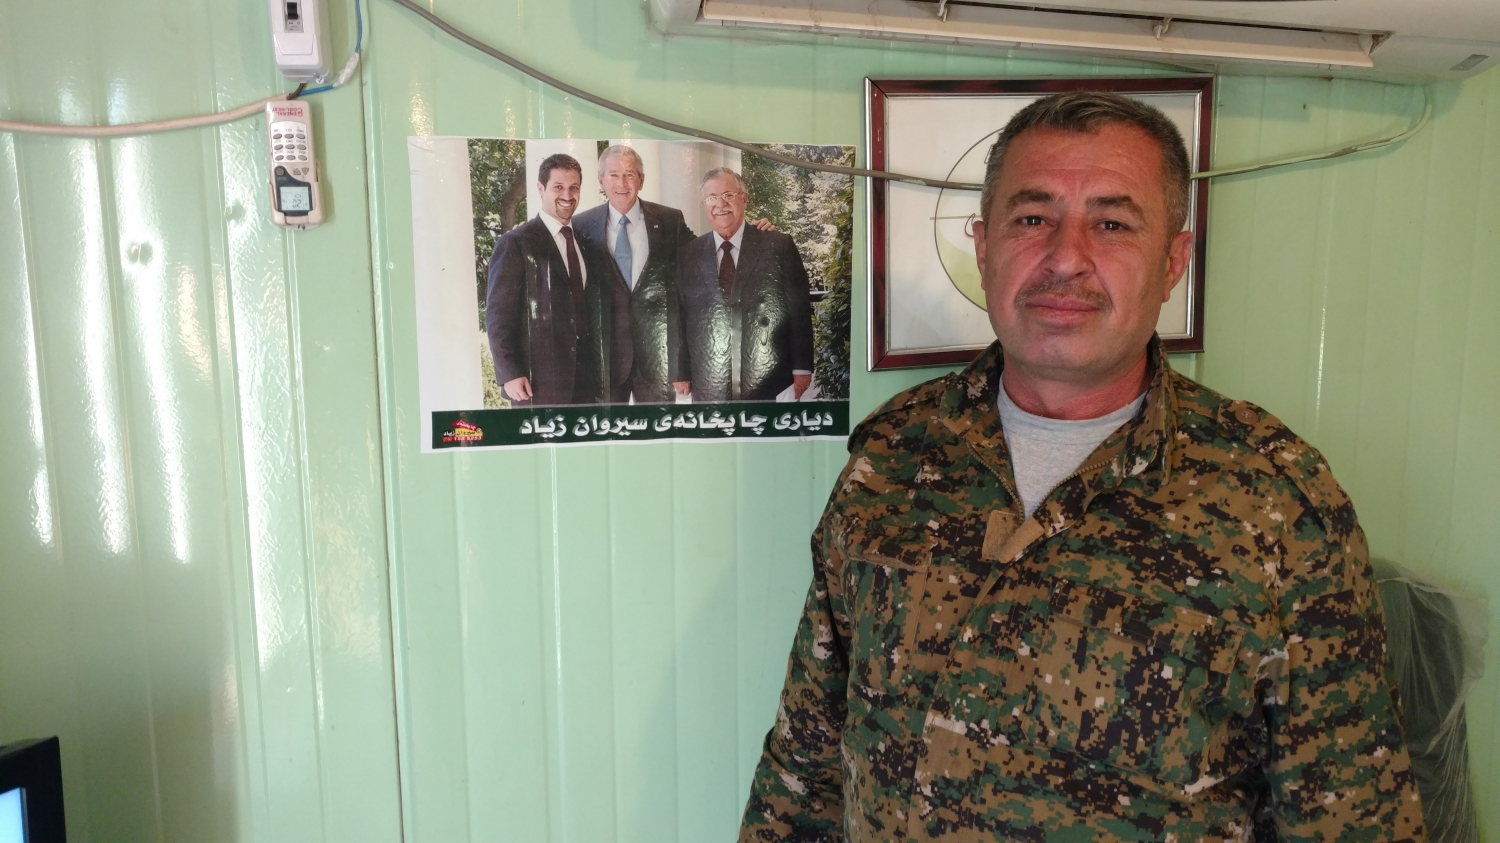 peshmerga soldier in front of a picture of George W Bush. Source: self